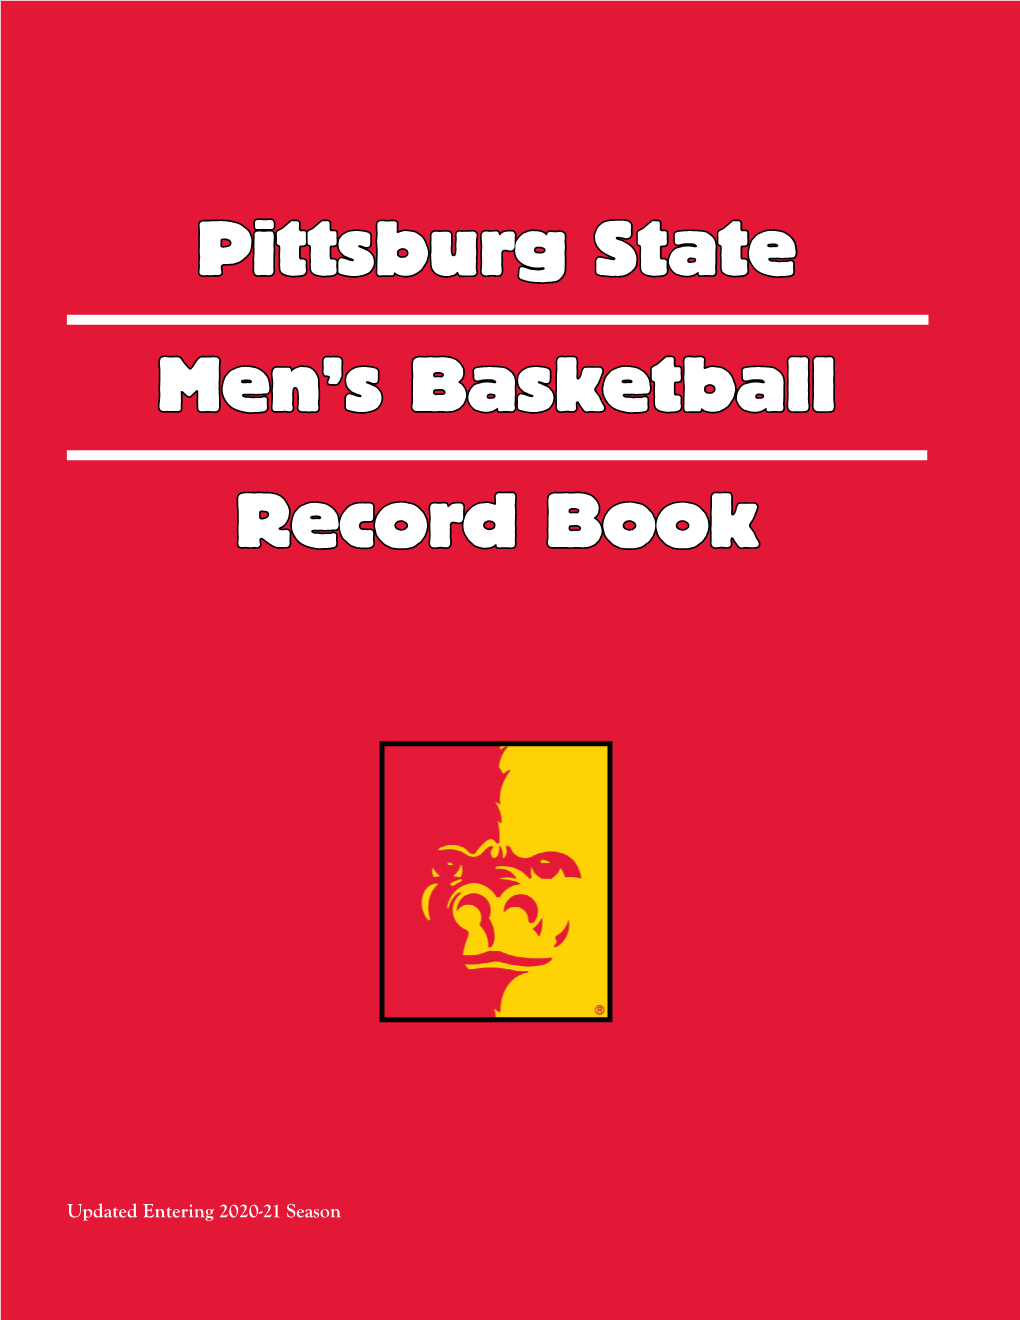 Pittsburg State Men's Basketball Record Book